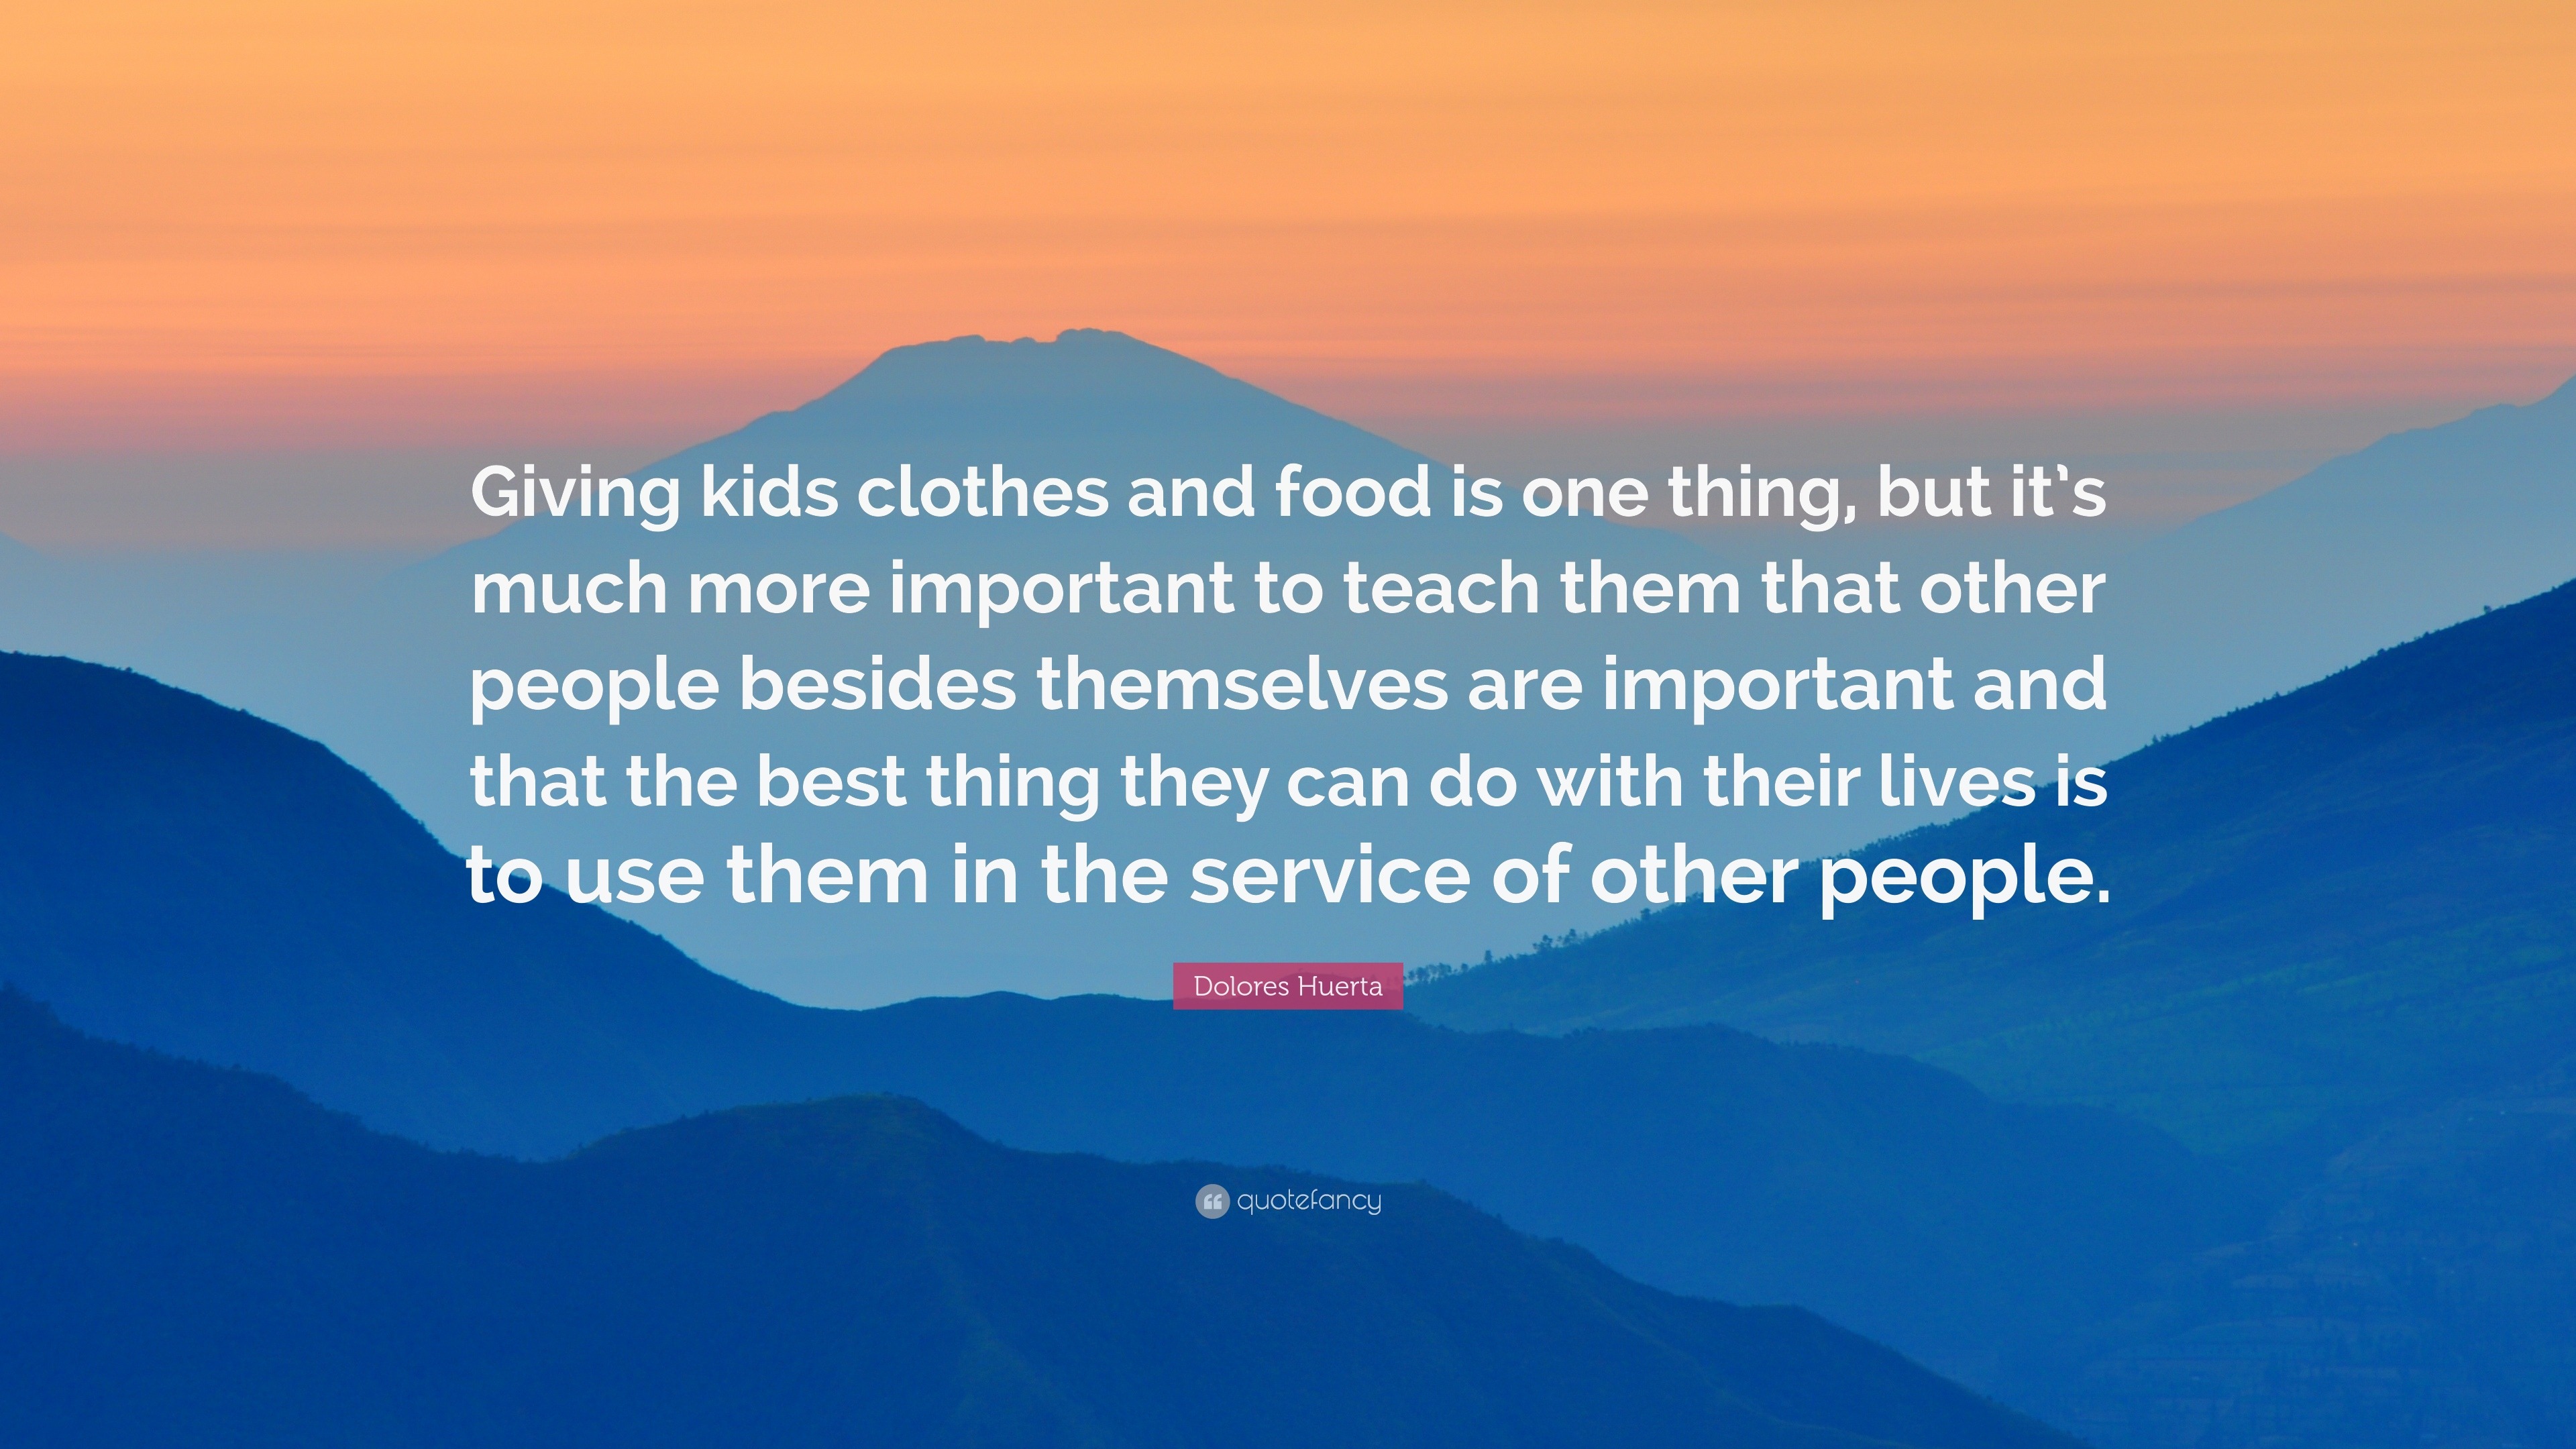 Dolores Huerta Quote: “Giving kids clothes and food is one thing, but ...